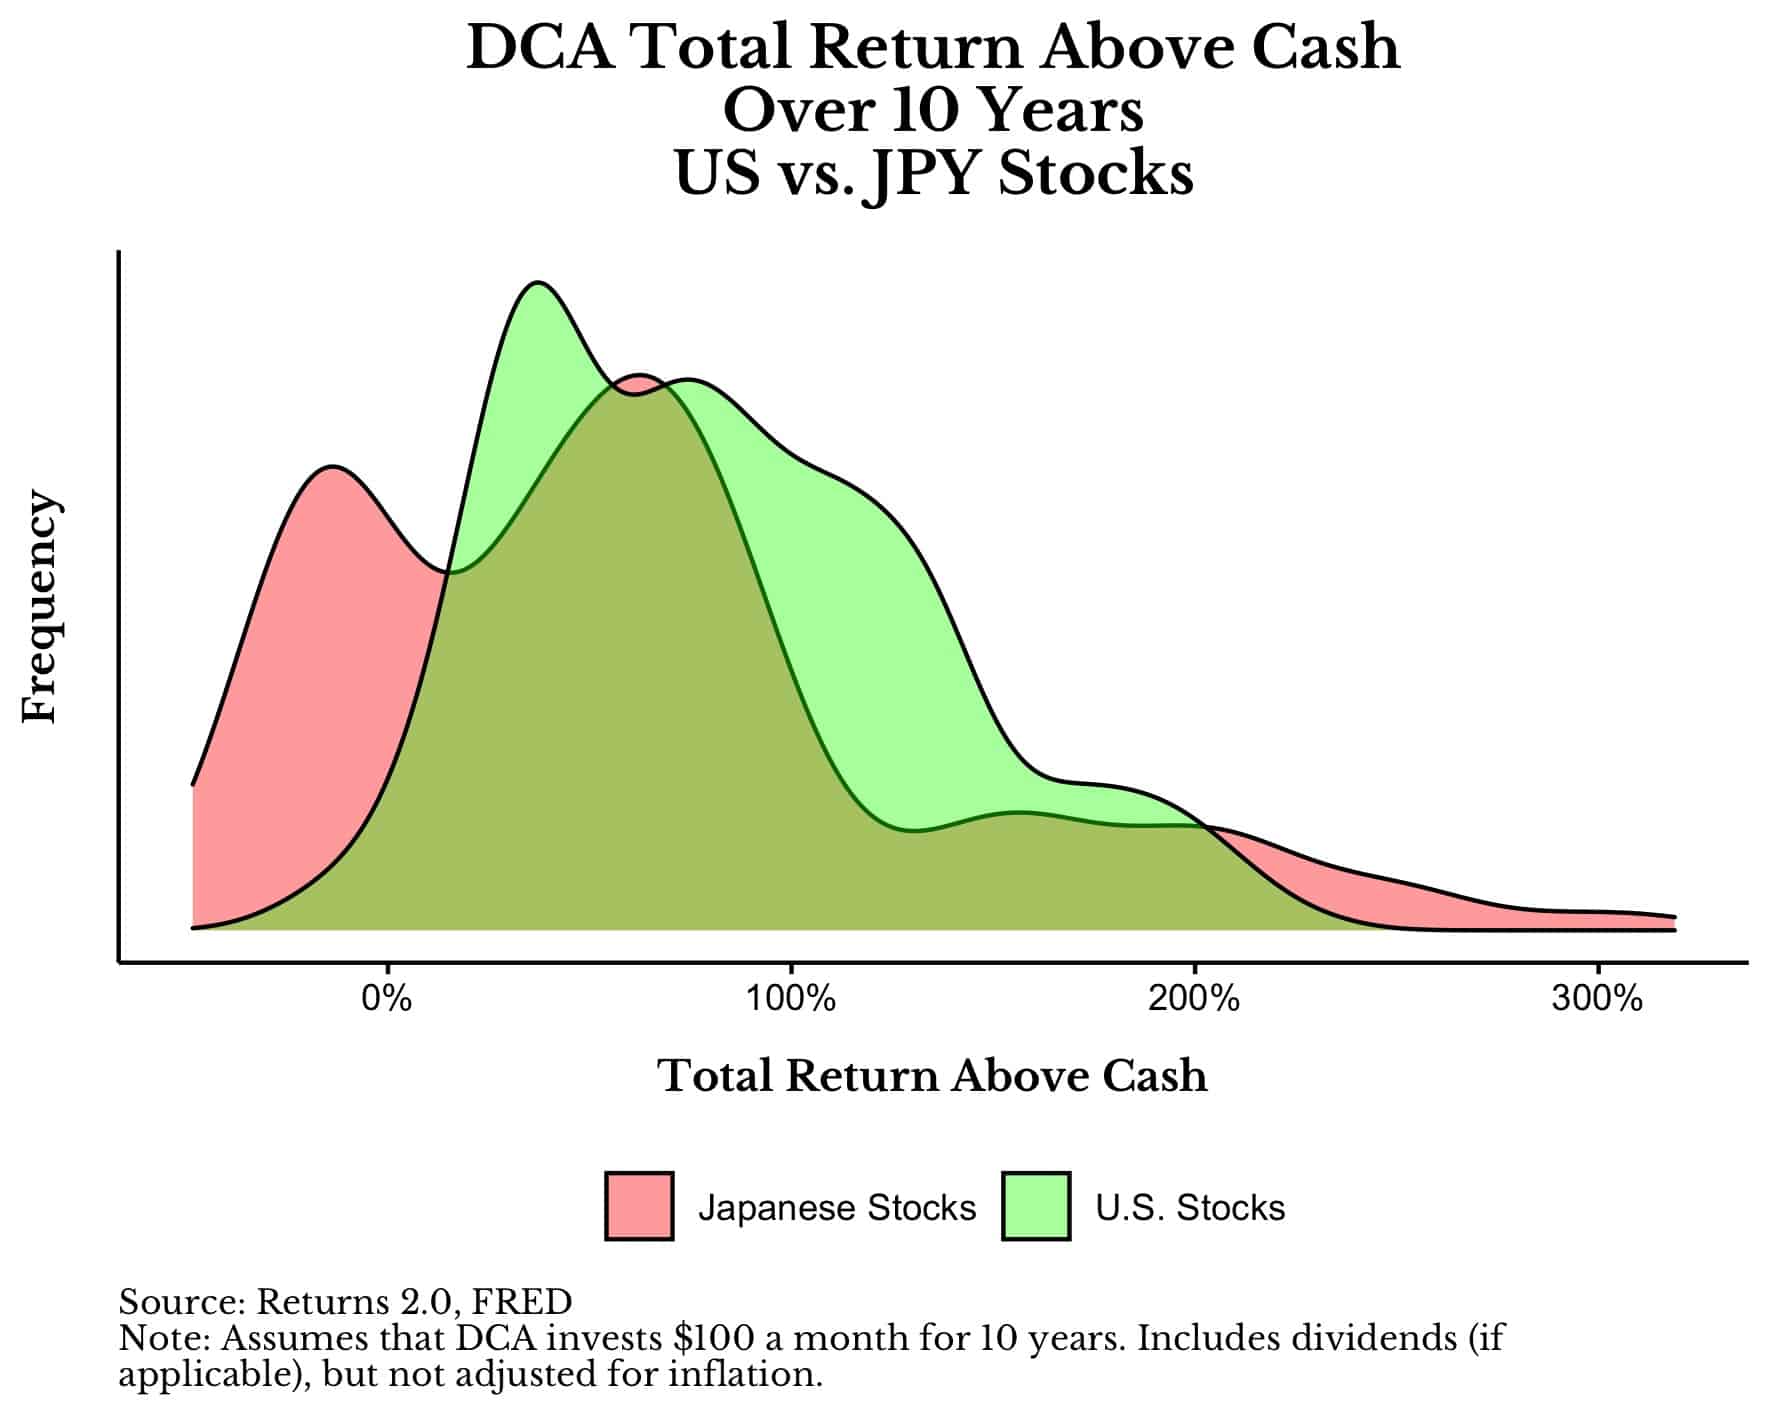 DCA total return above cash distributions for Japanese and U.S. stocks